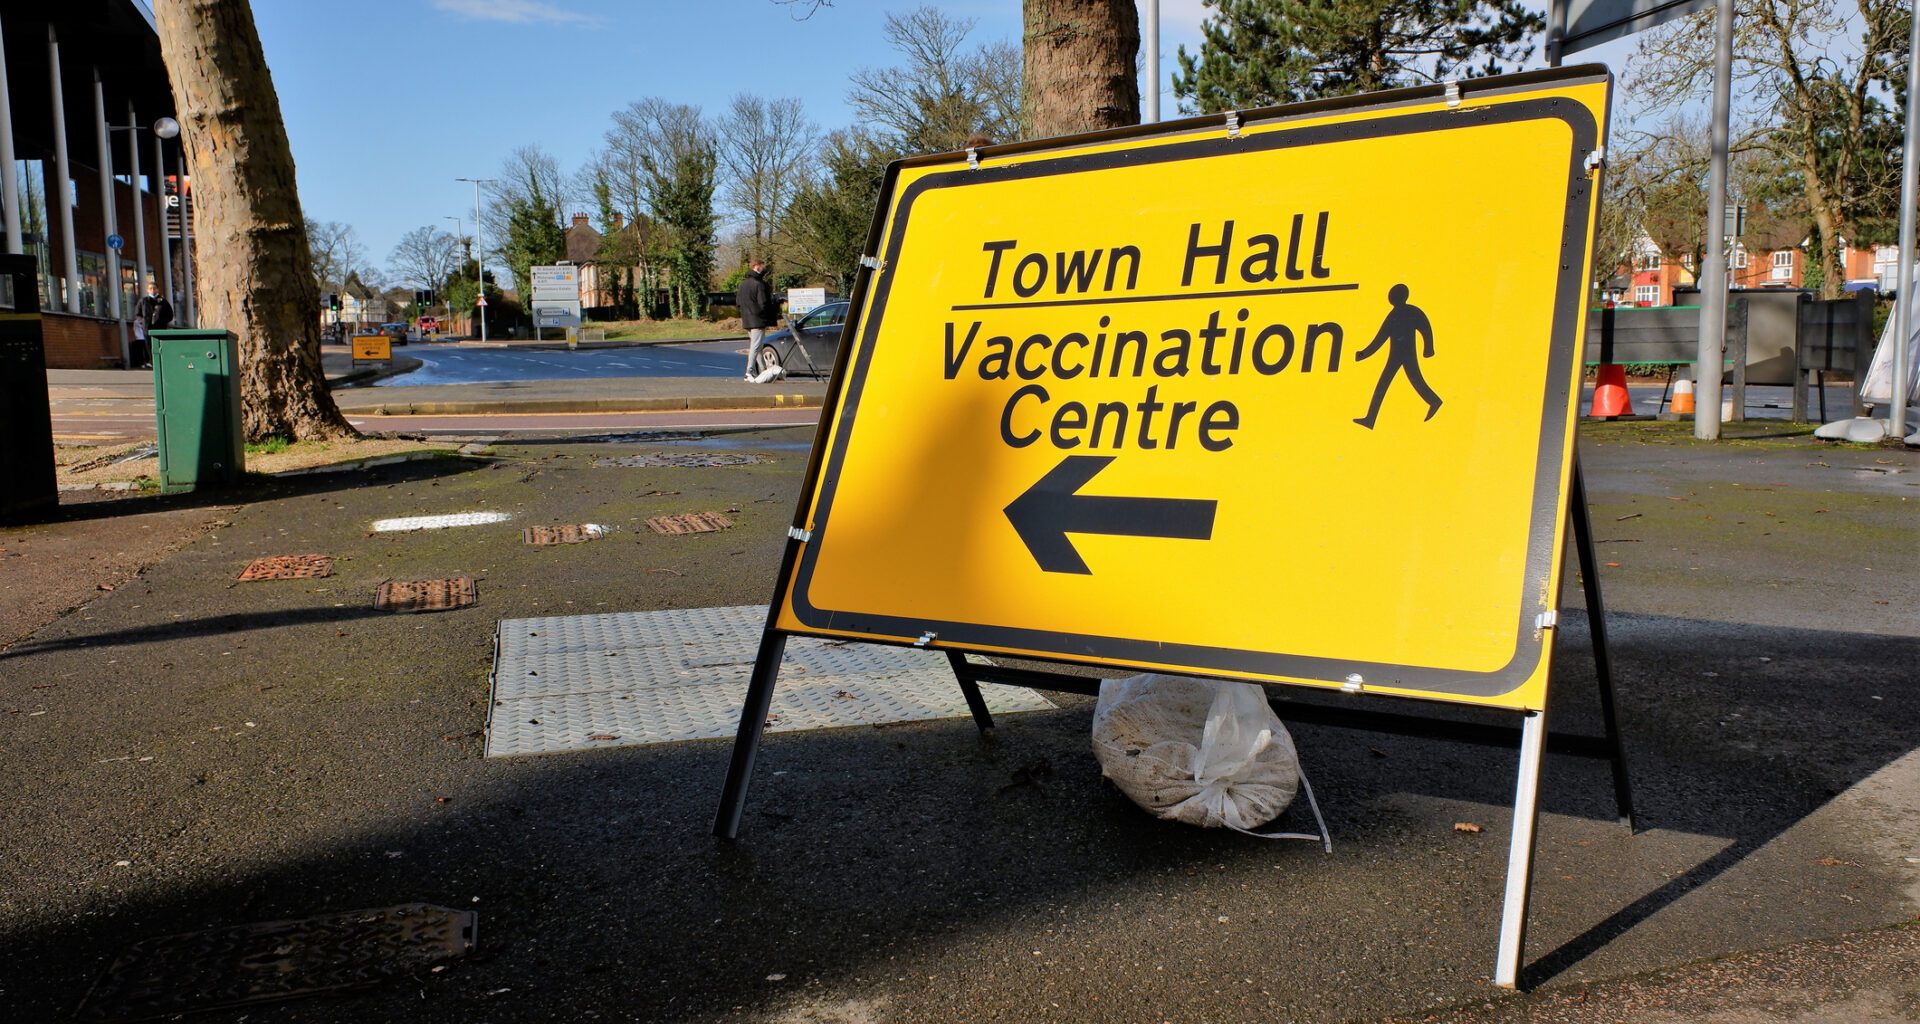 Claim that Brexit allowed faster vaccine rollout is False 3